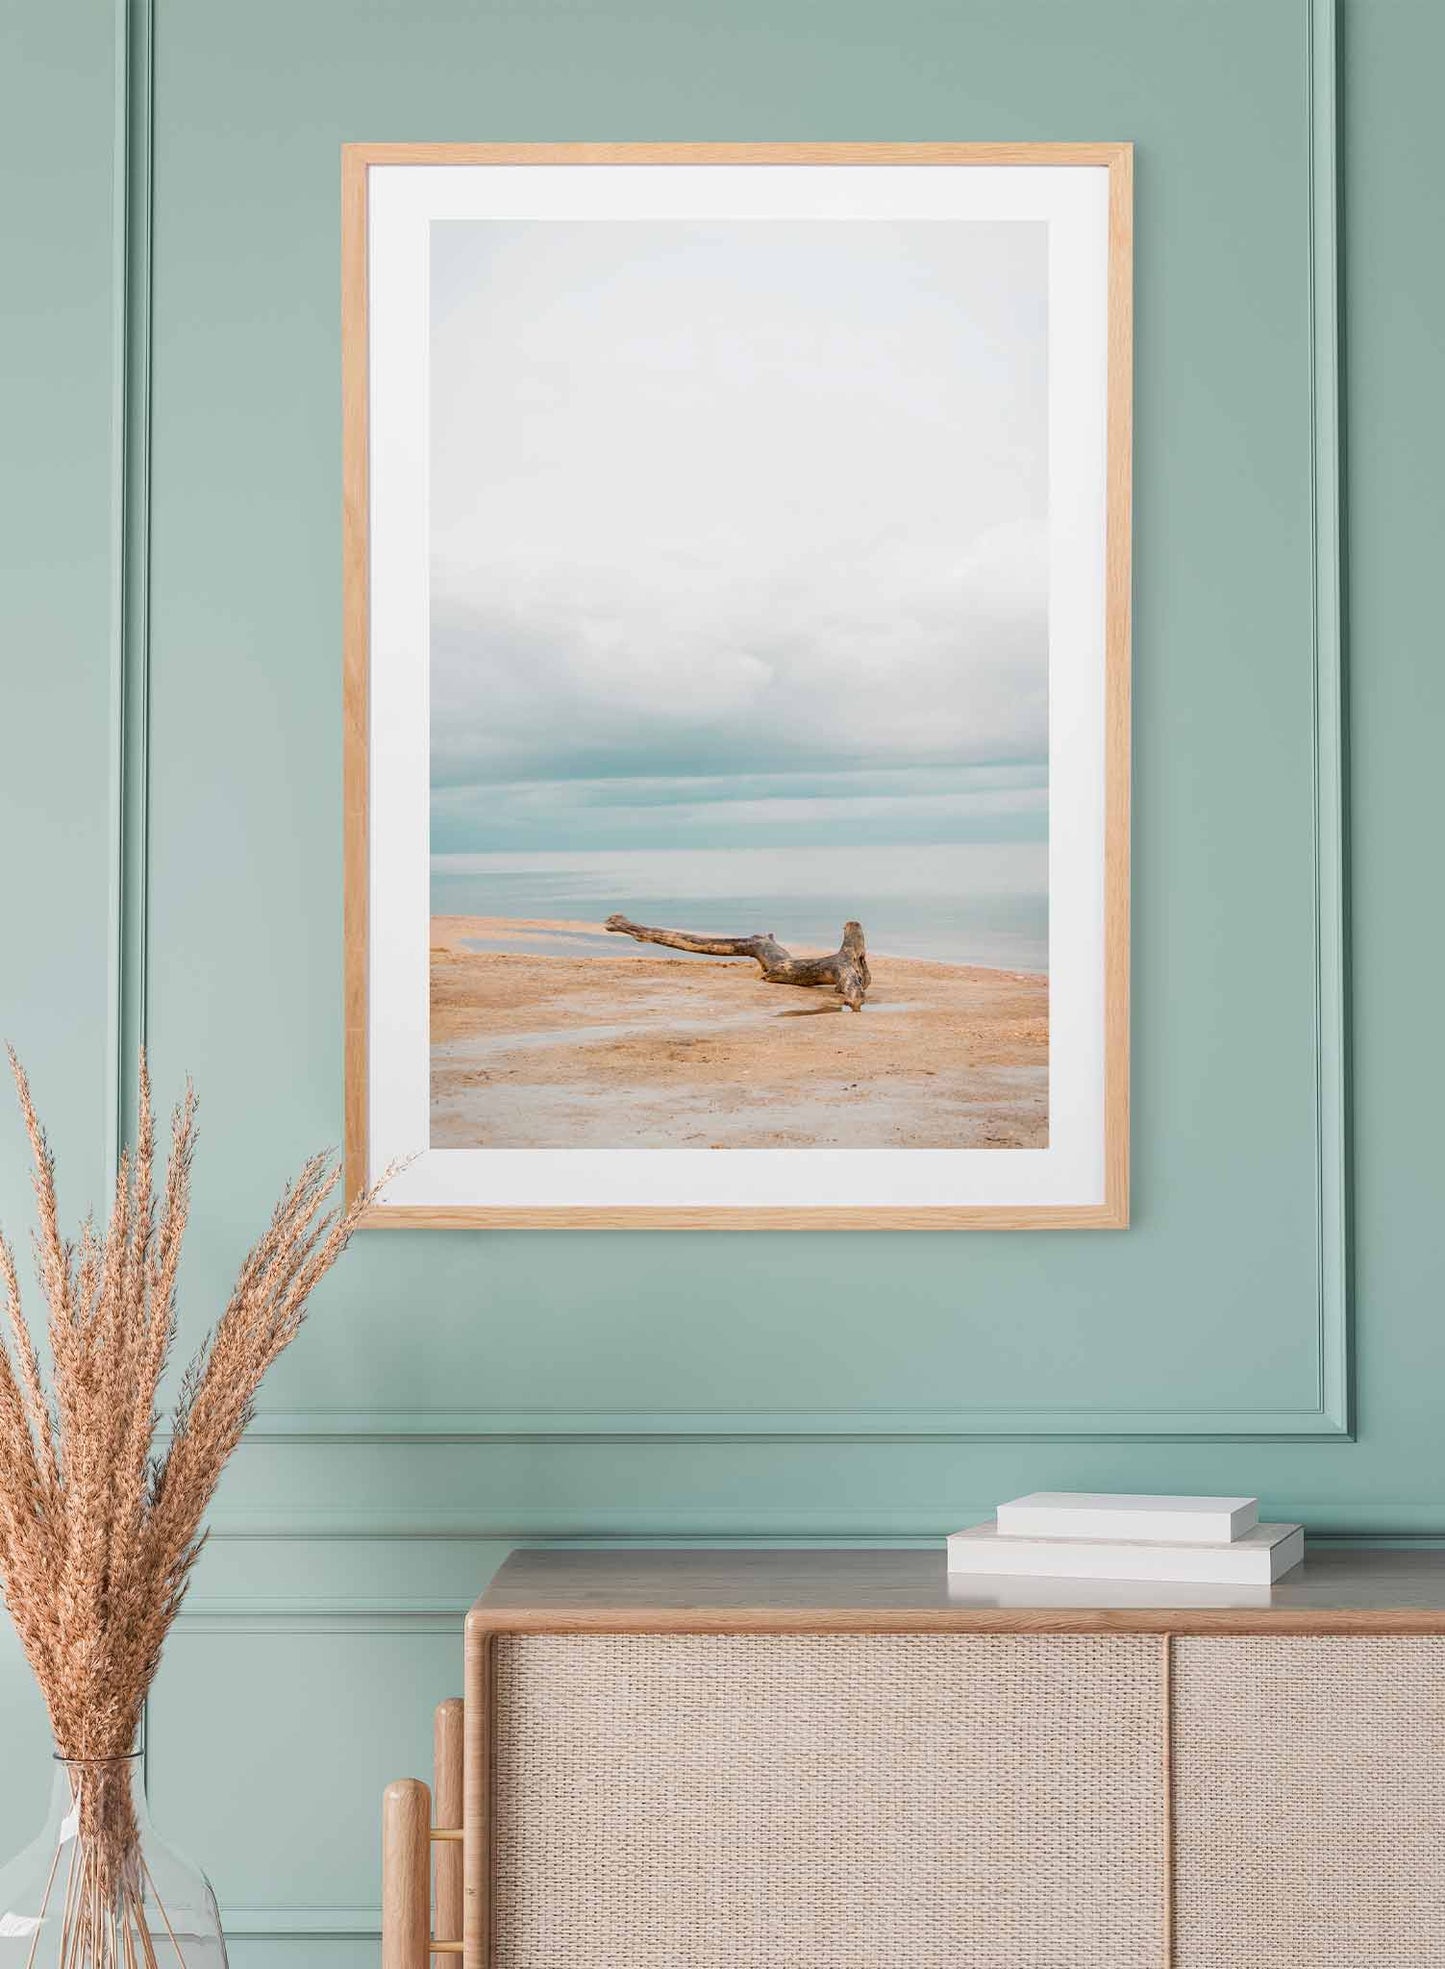 Coastal Morning is a minimalist photography of a calm beach overlooking a cloudy blue sky with a driftwood as focal point by Opposite Wall.